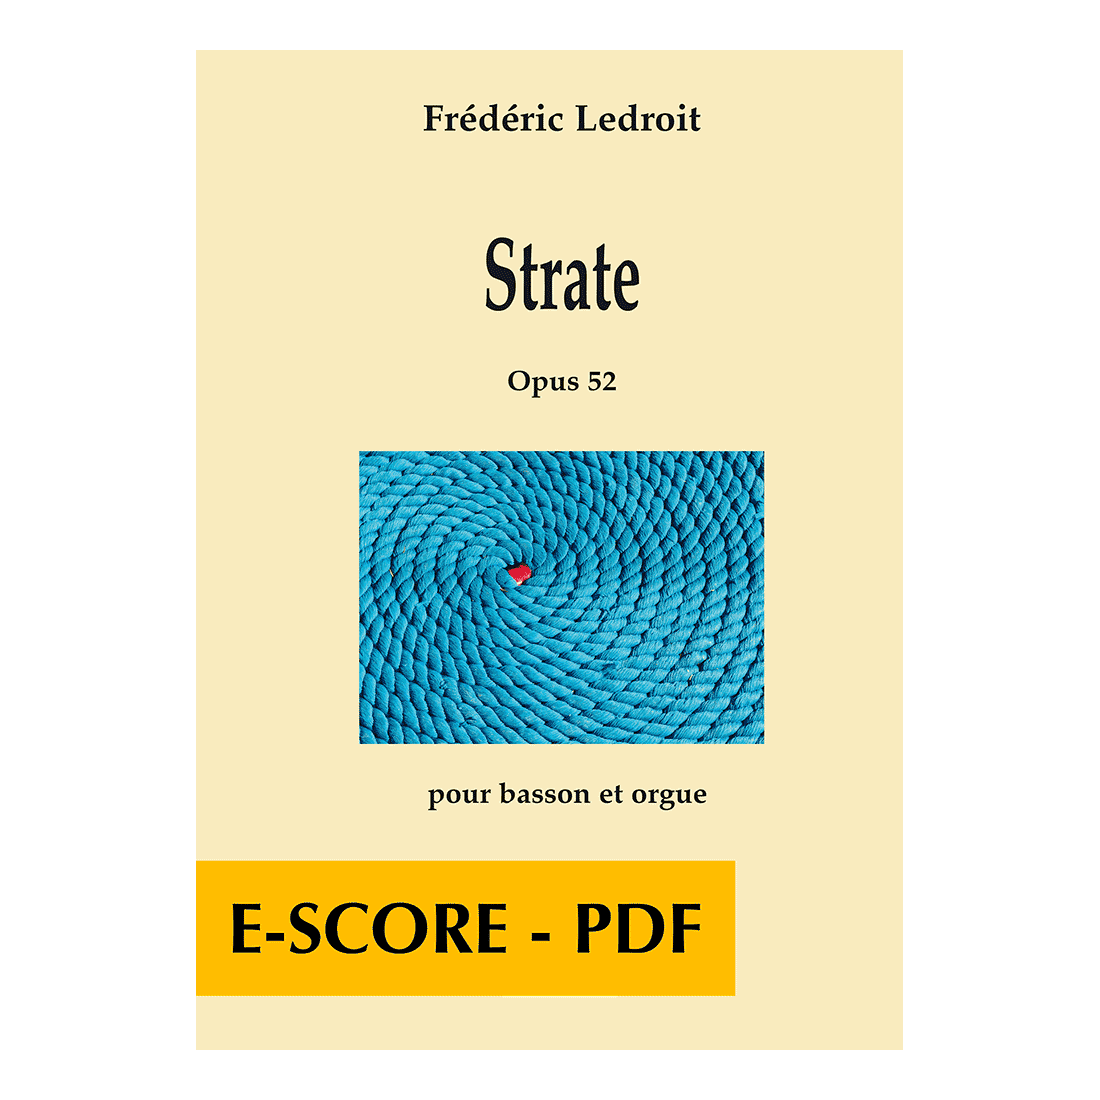 Strate for bassoon and organ - E-score PDF